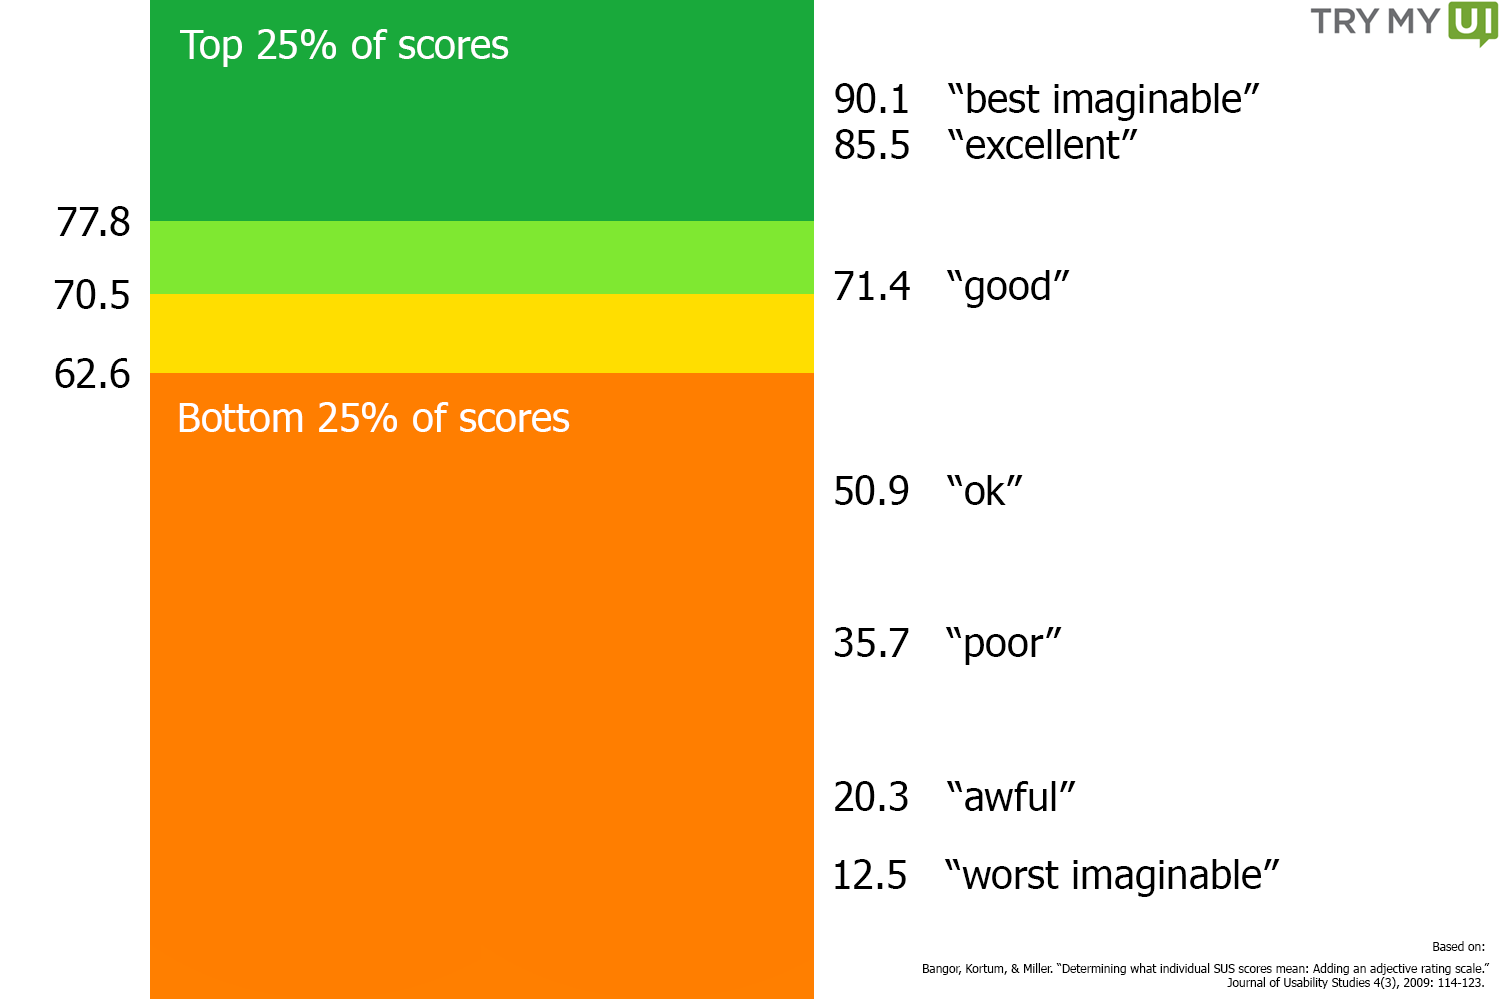 SUS scores with labels and visual breakdown